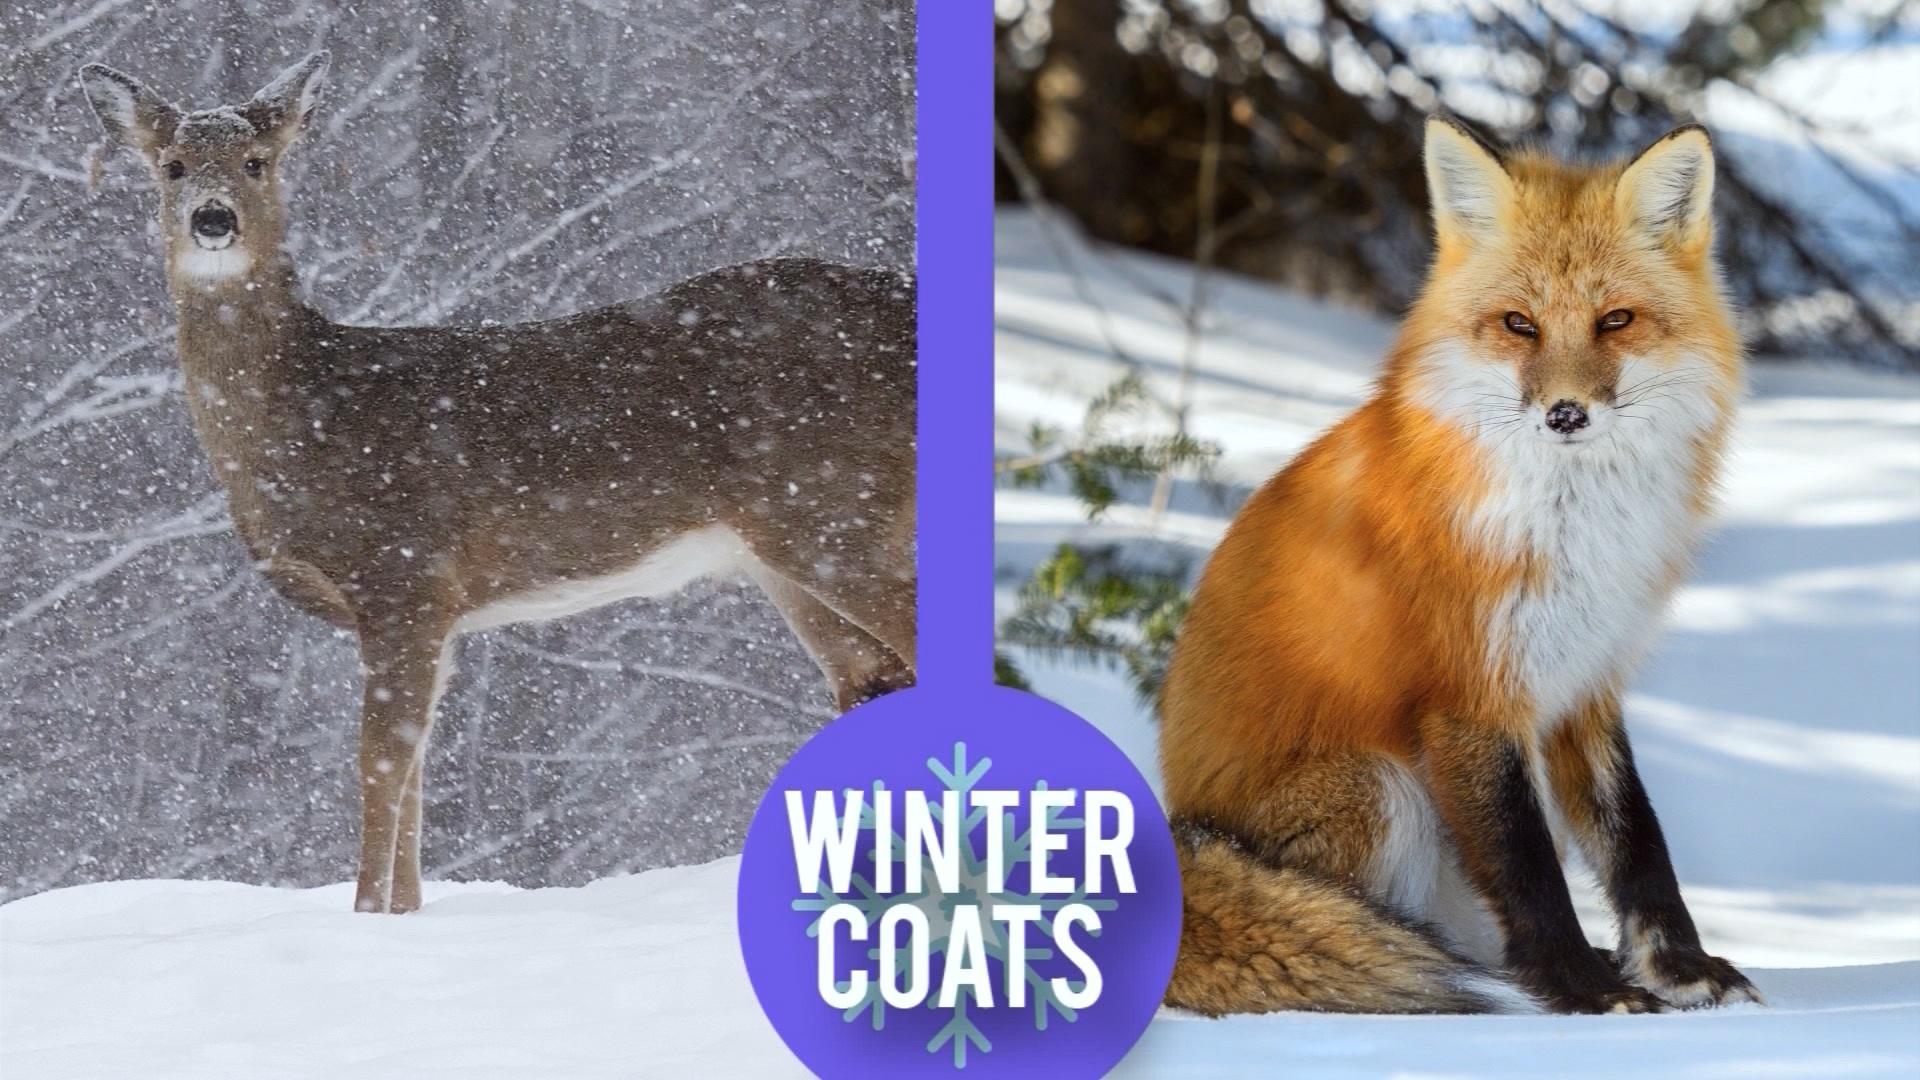 Cool Ways Animals Adapt For the Winter, Spot on Science